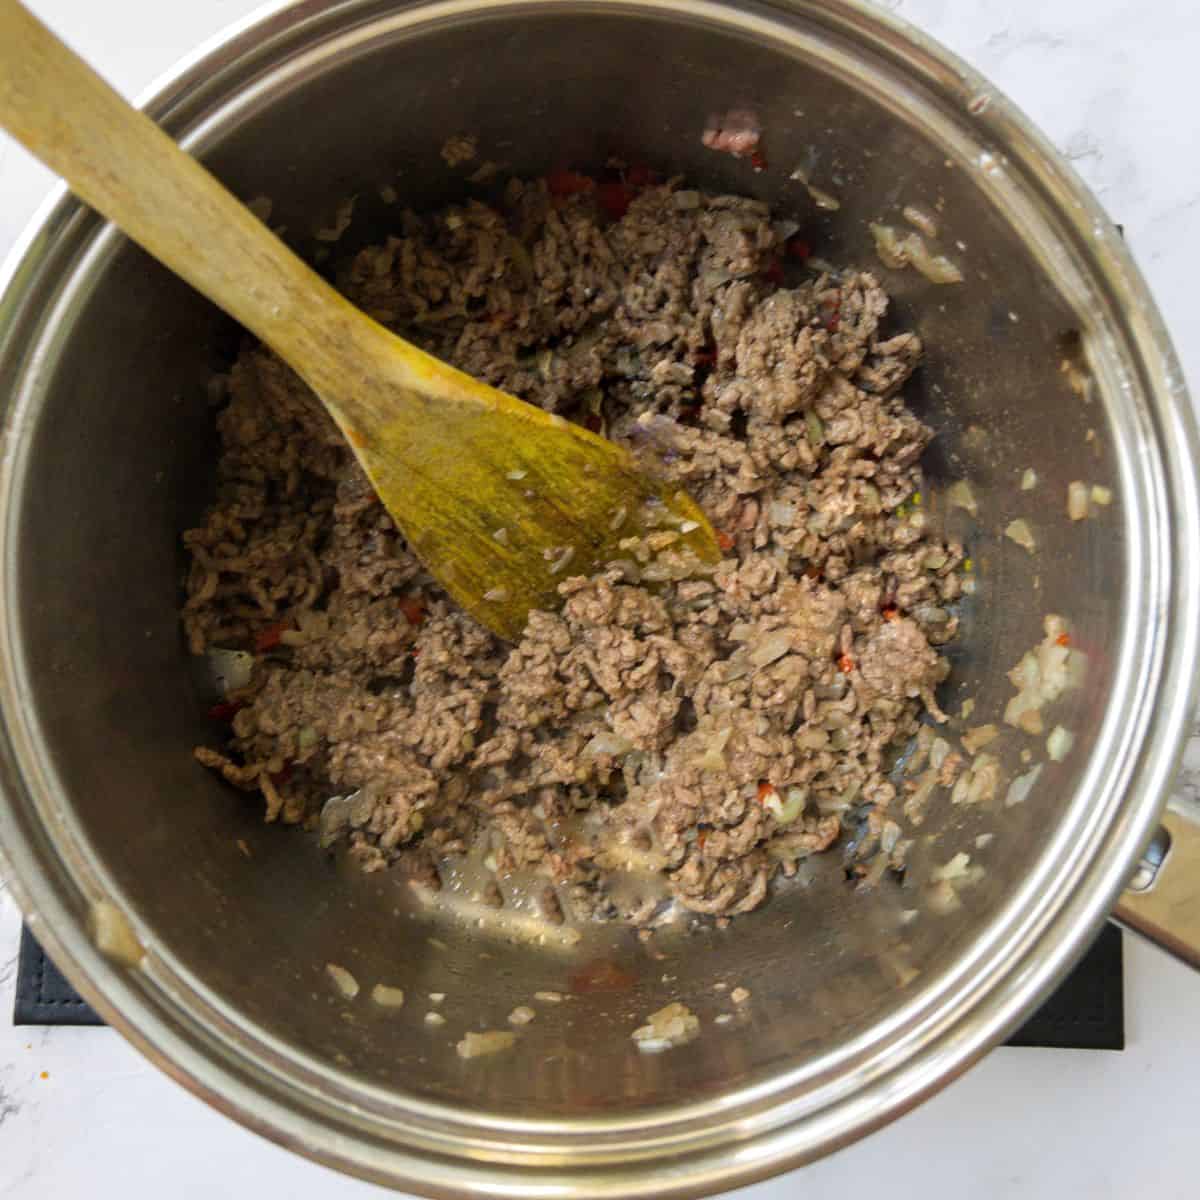 Mince beed being fried in a saucepan, being stirred with a wooden spoon.